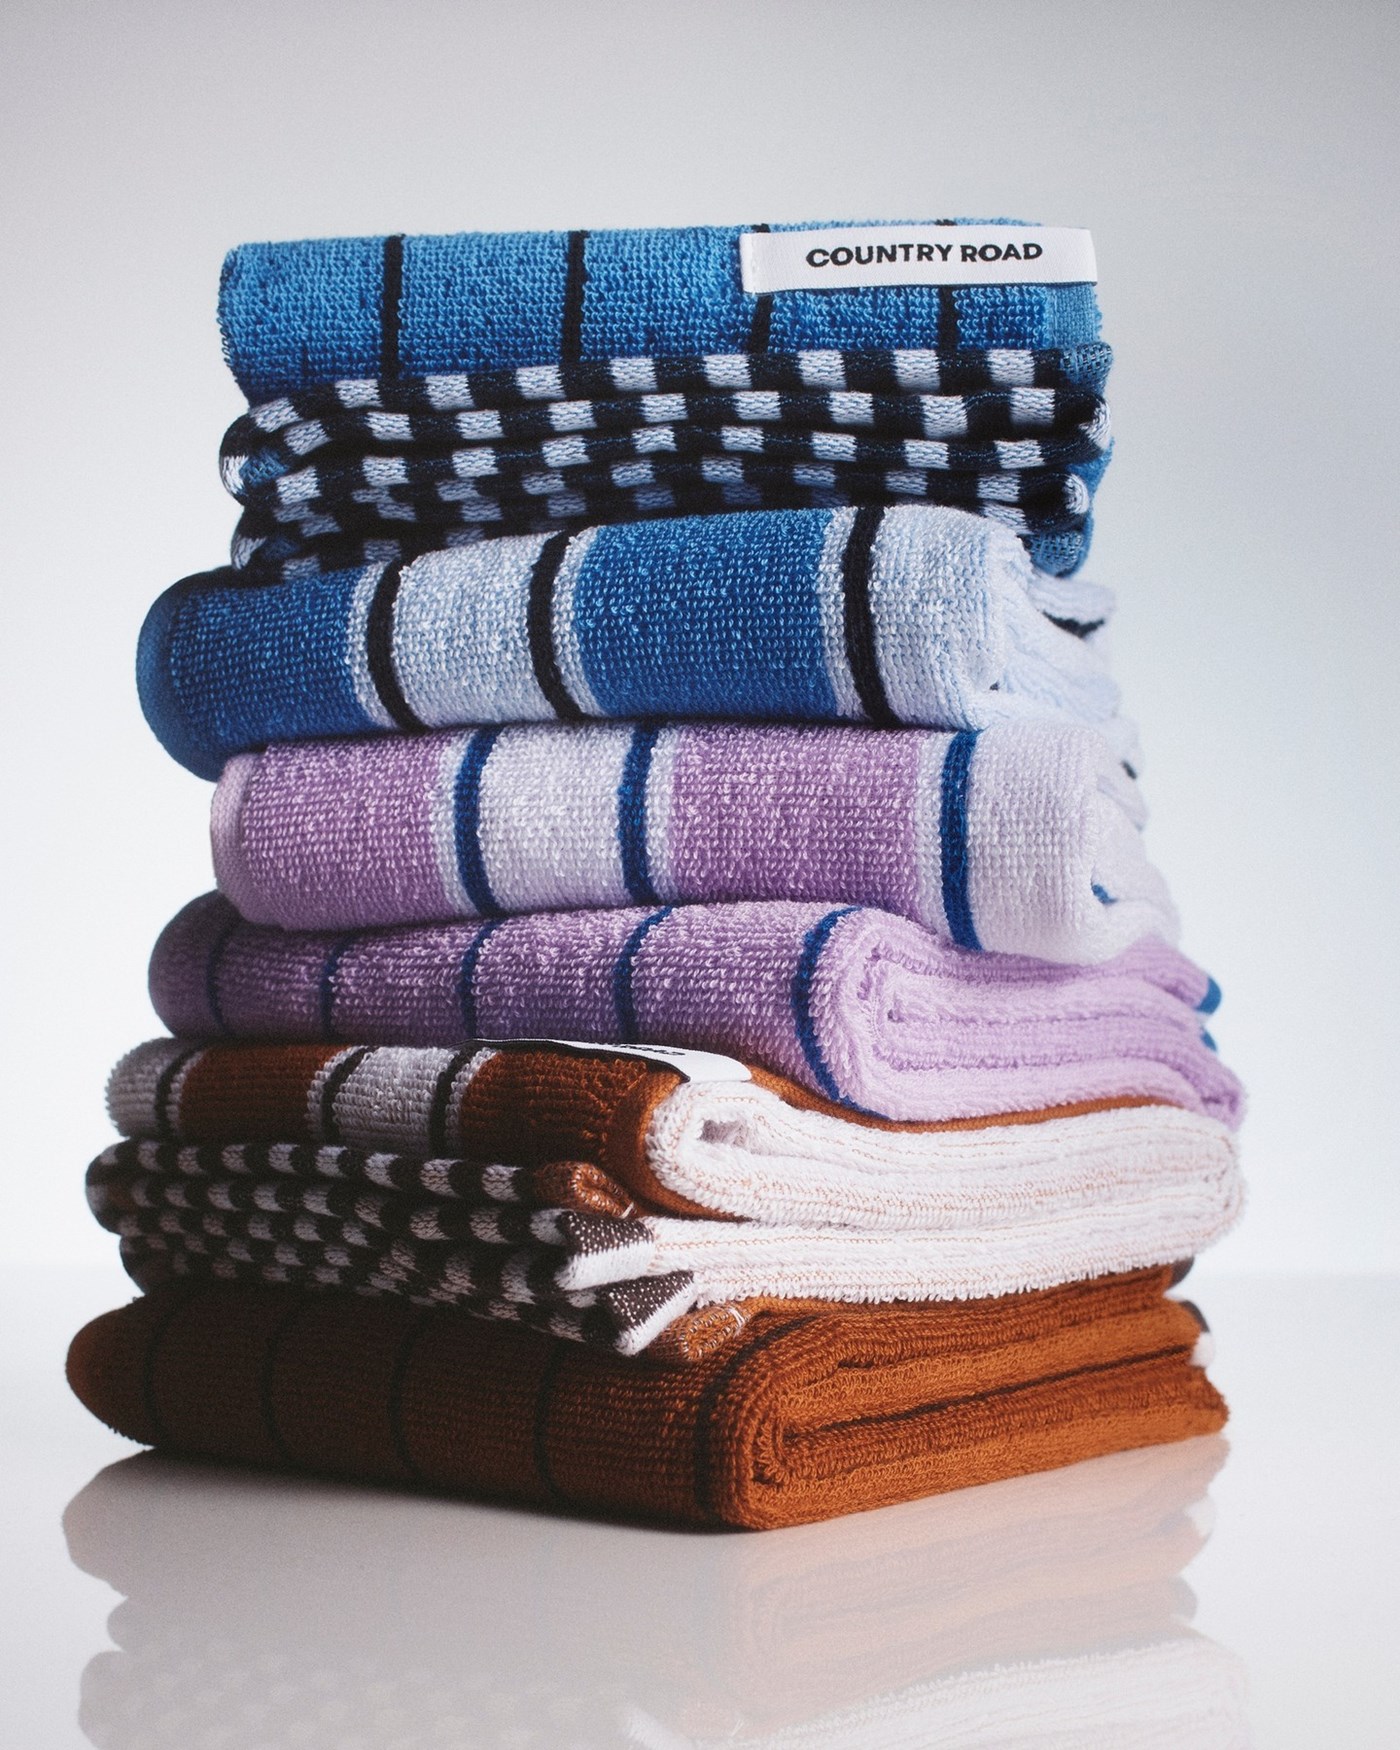 Country Road towels